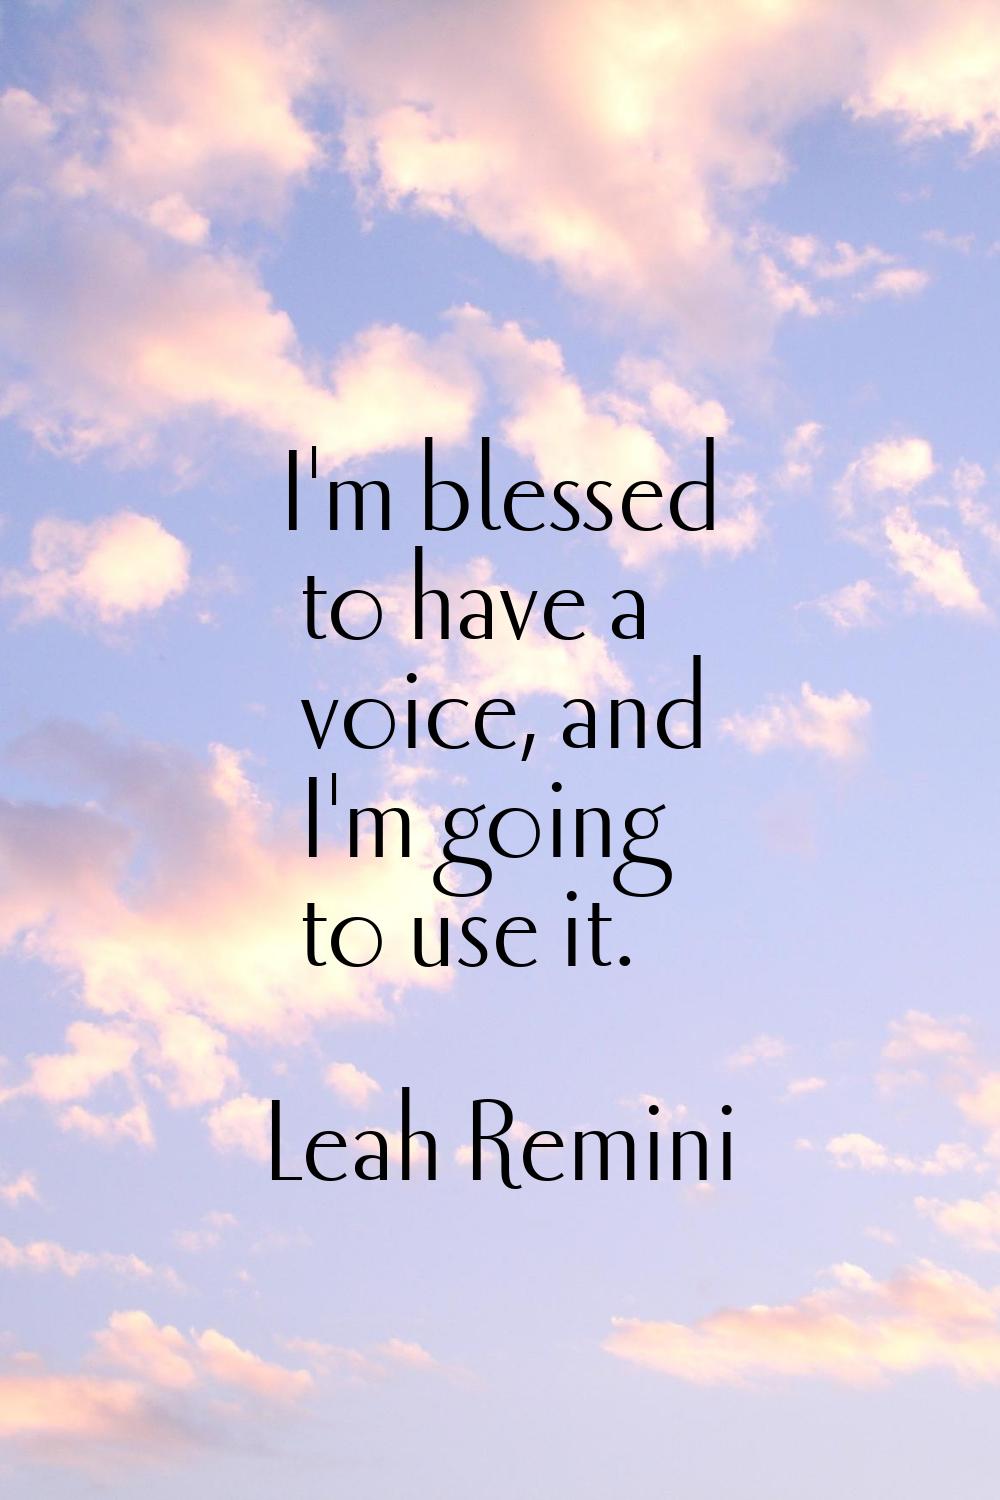 I'm blessed to have a voice, and I'm going to use it.